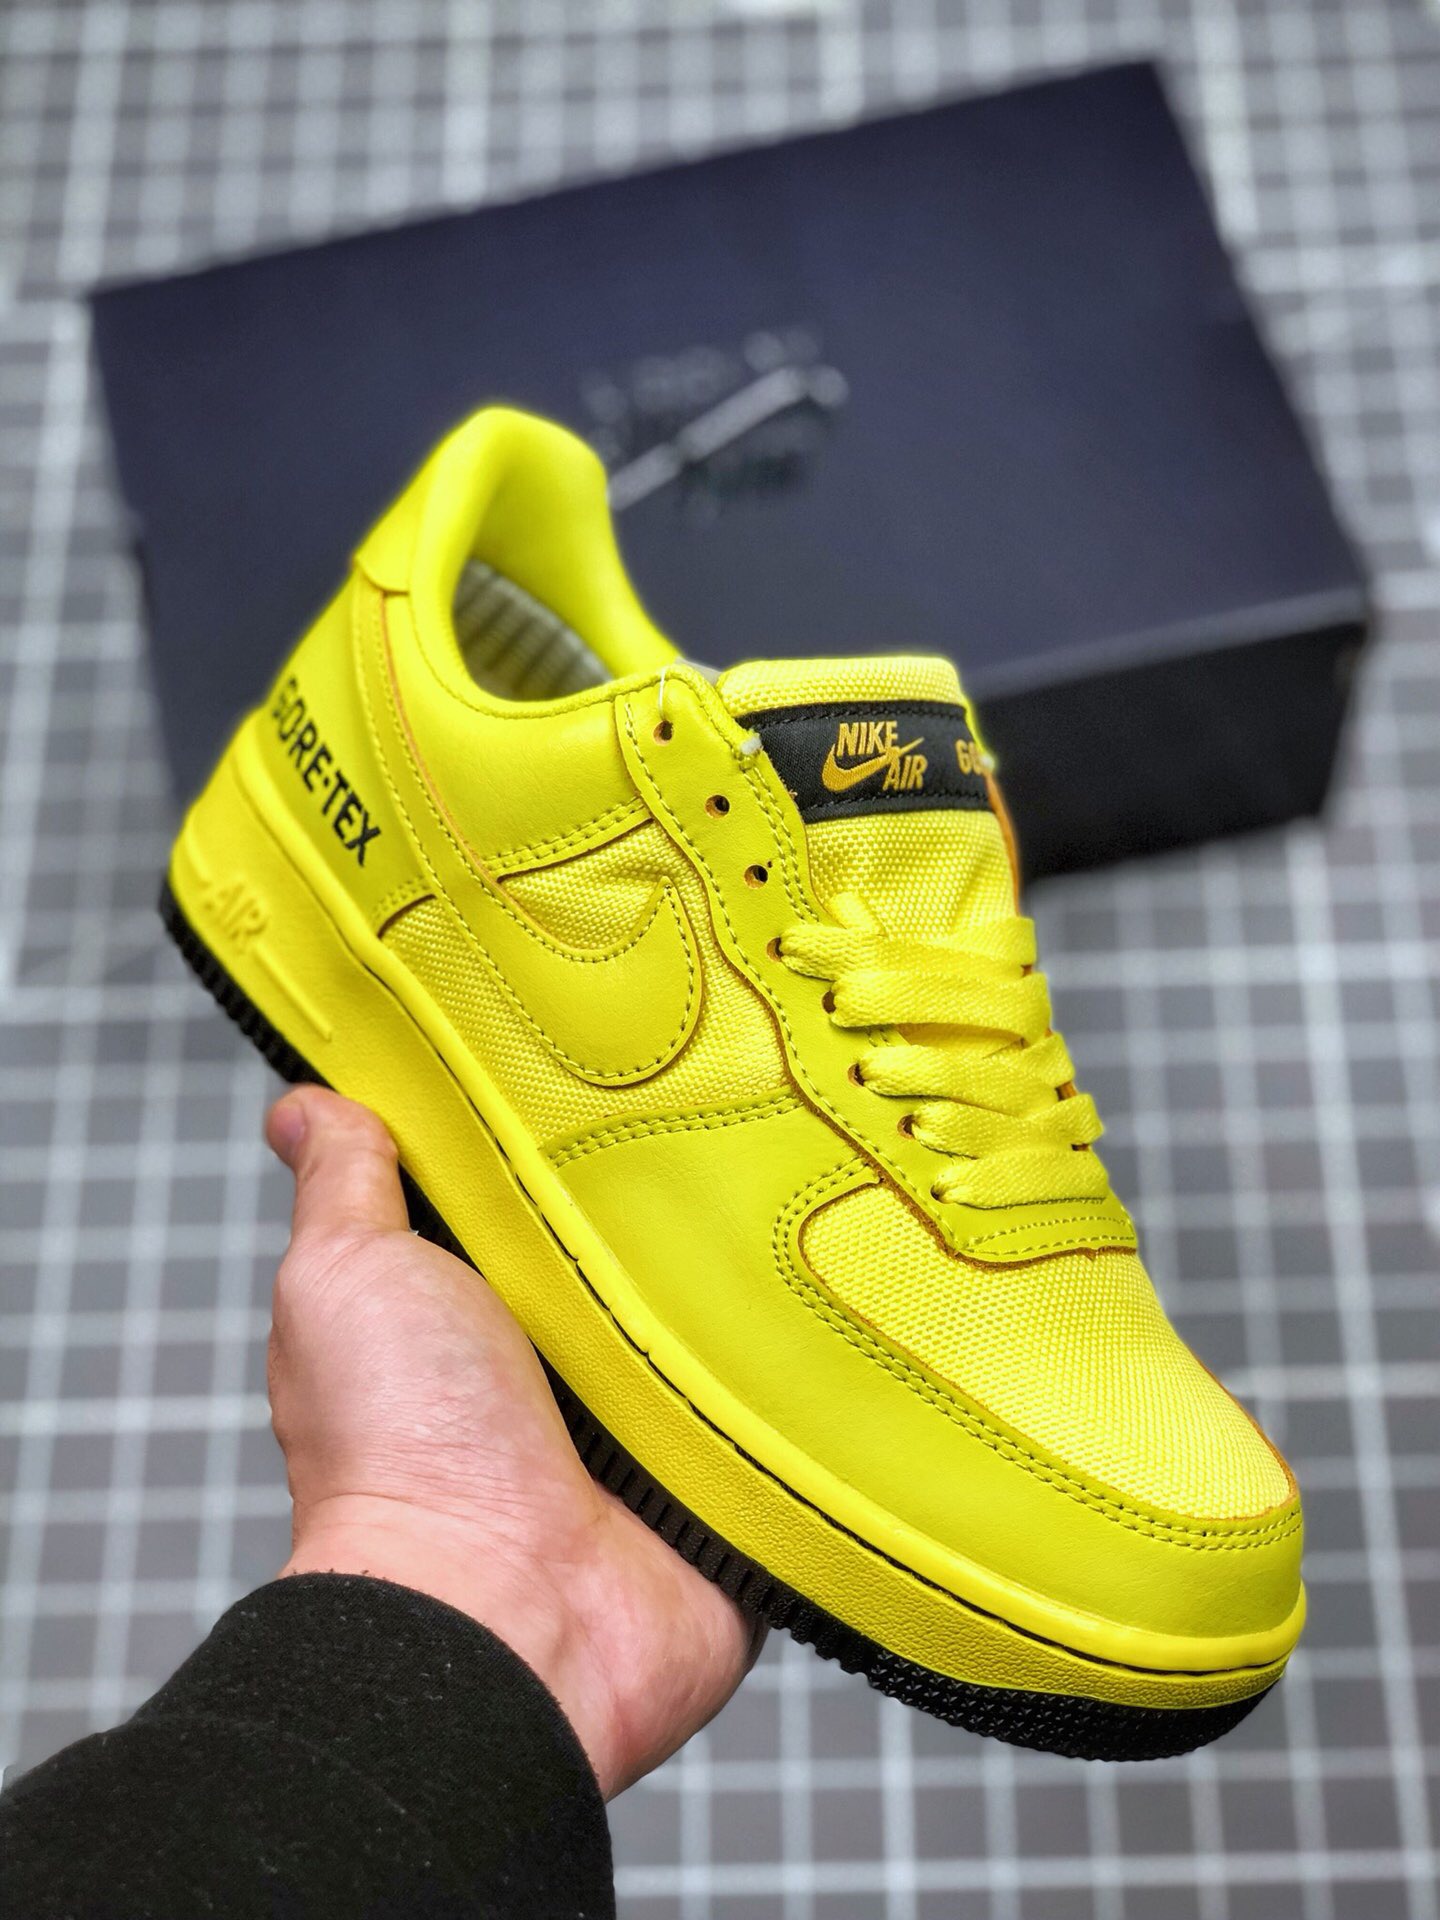 Nike Air AF Force 1 GORE-TEX Dynamic Yellow/Black Shoes